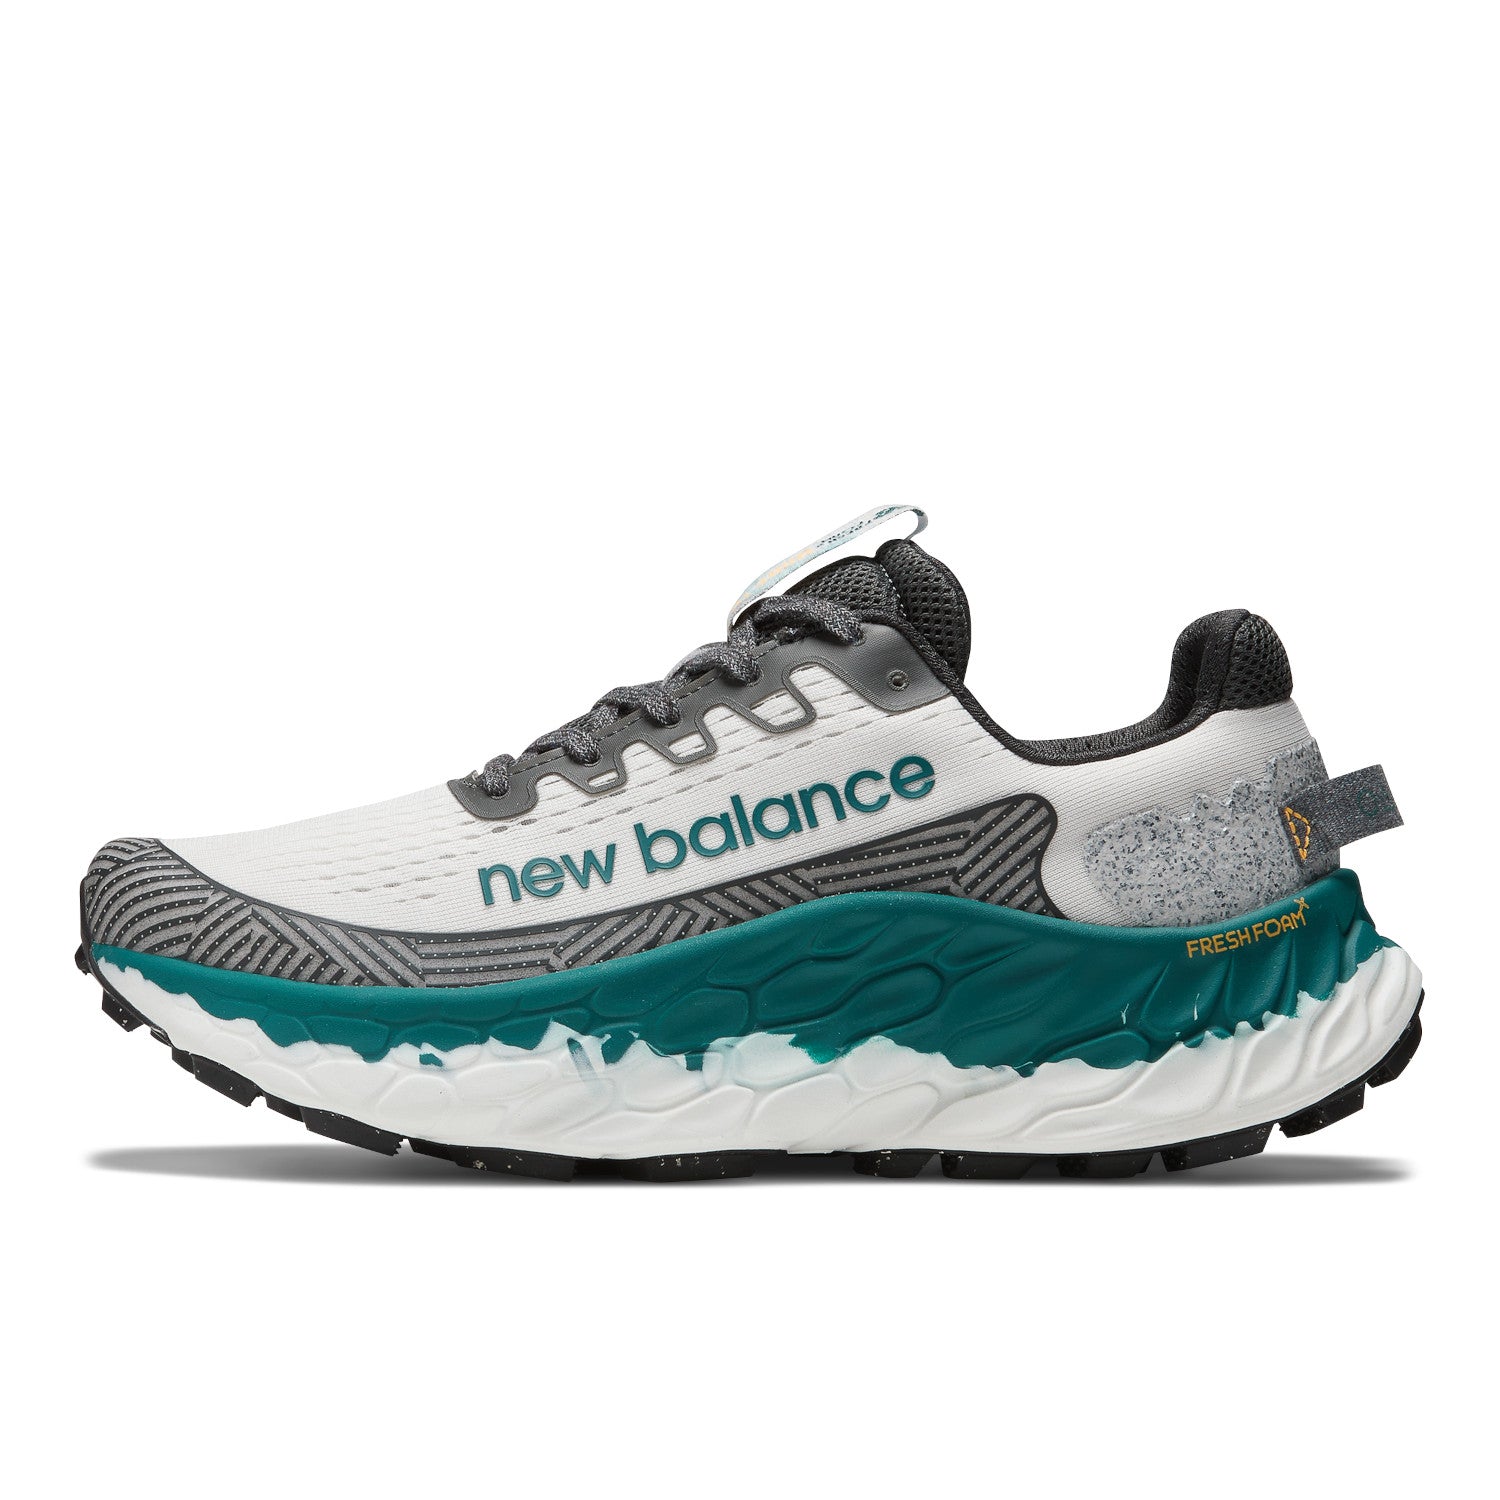 Men's New Balance Fresh Foam X Trail More v3 Color: Reflection with Vintage Teal